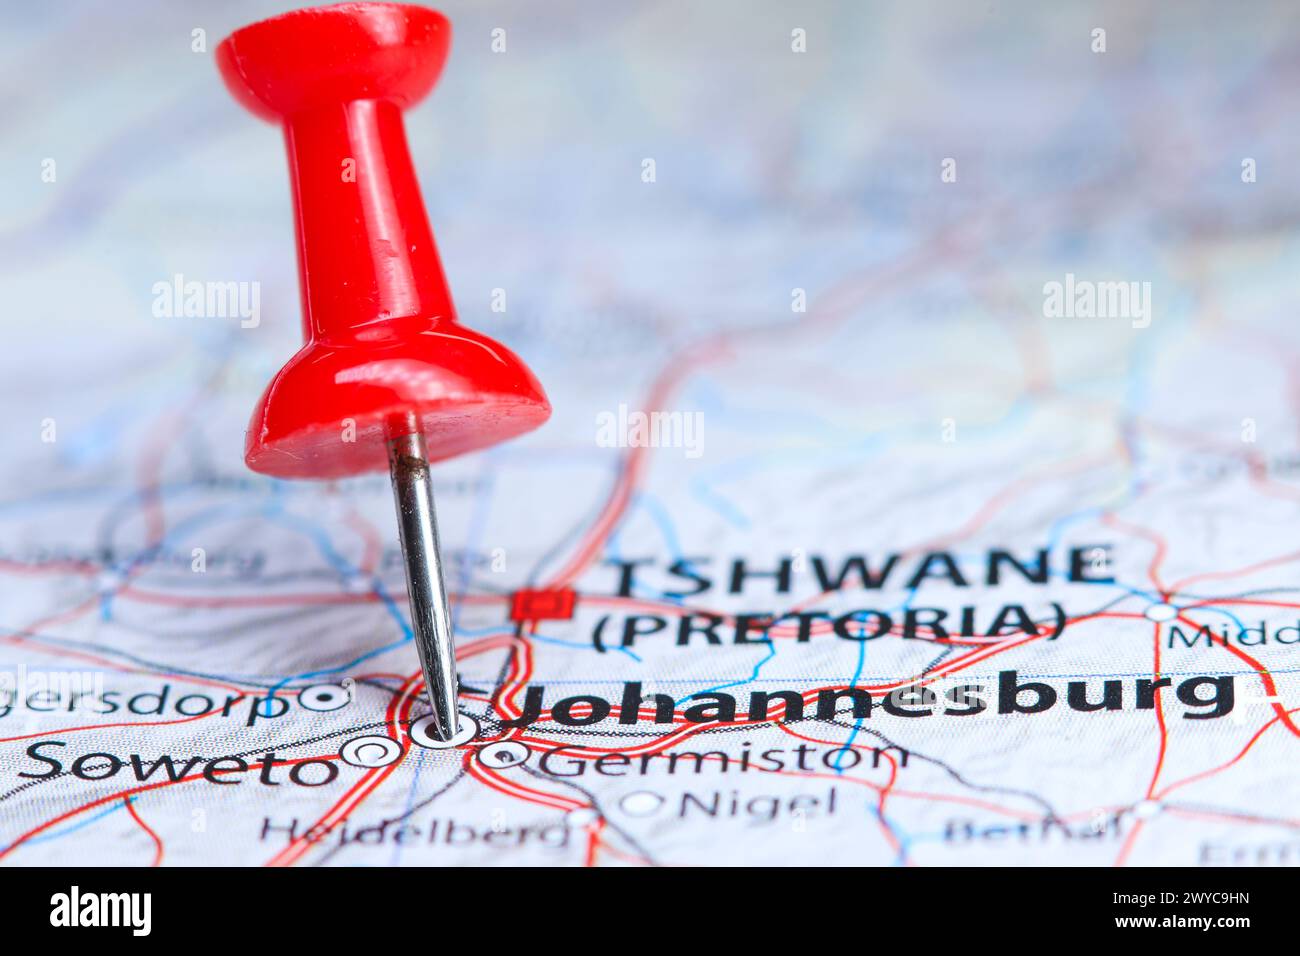 Johannesburg, South Africa pin on map Stock Photo